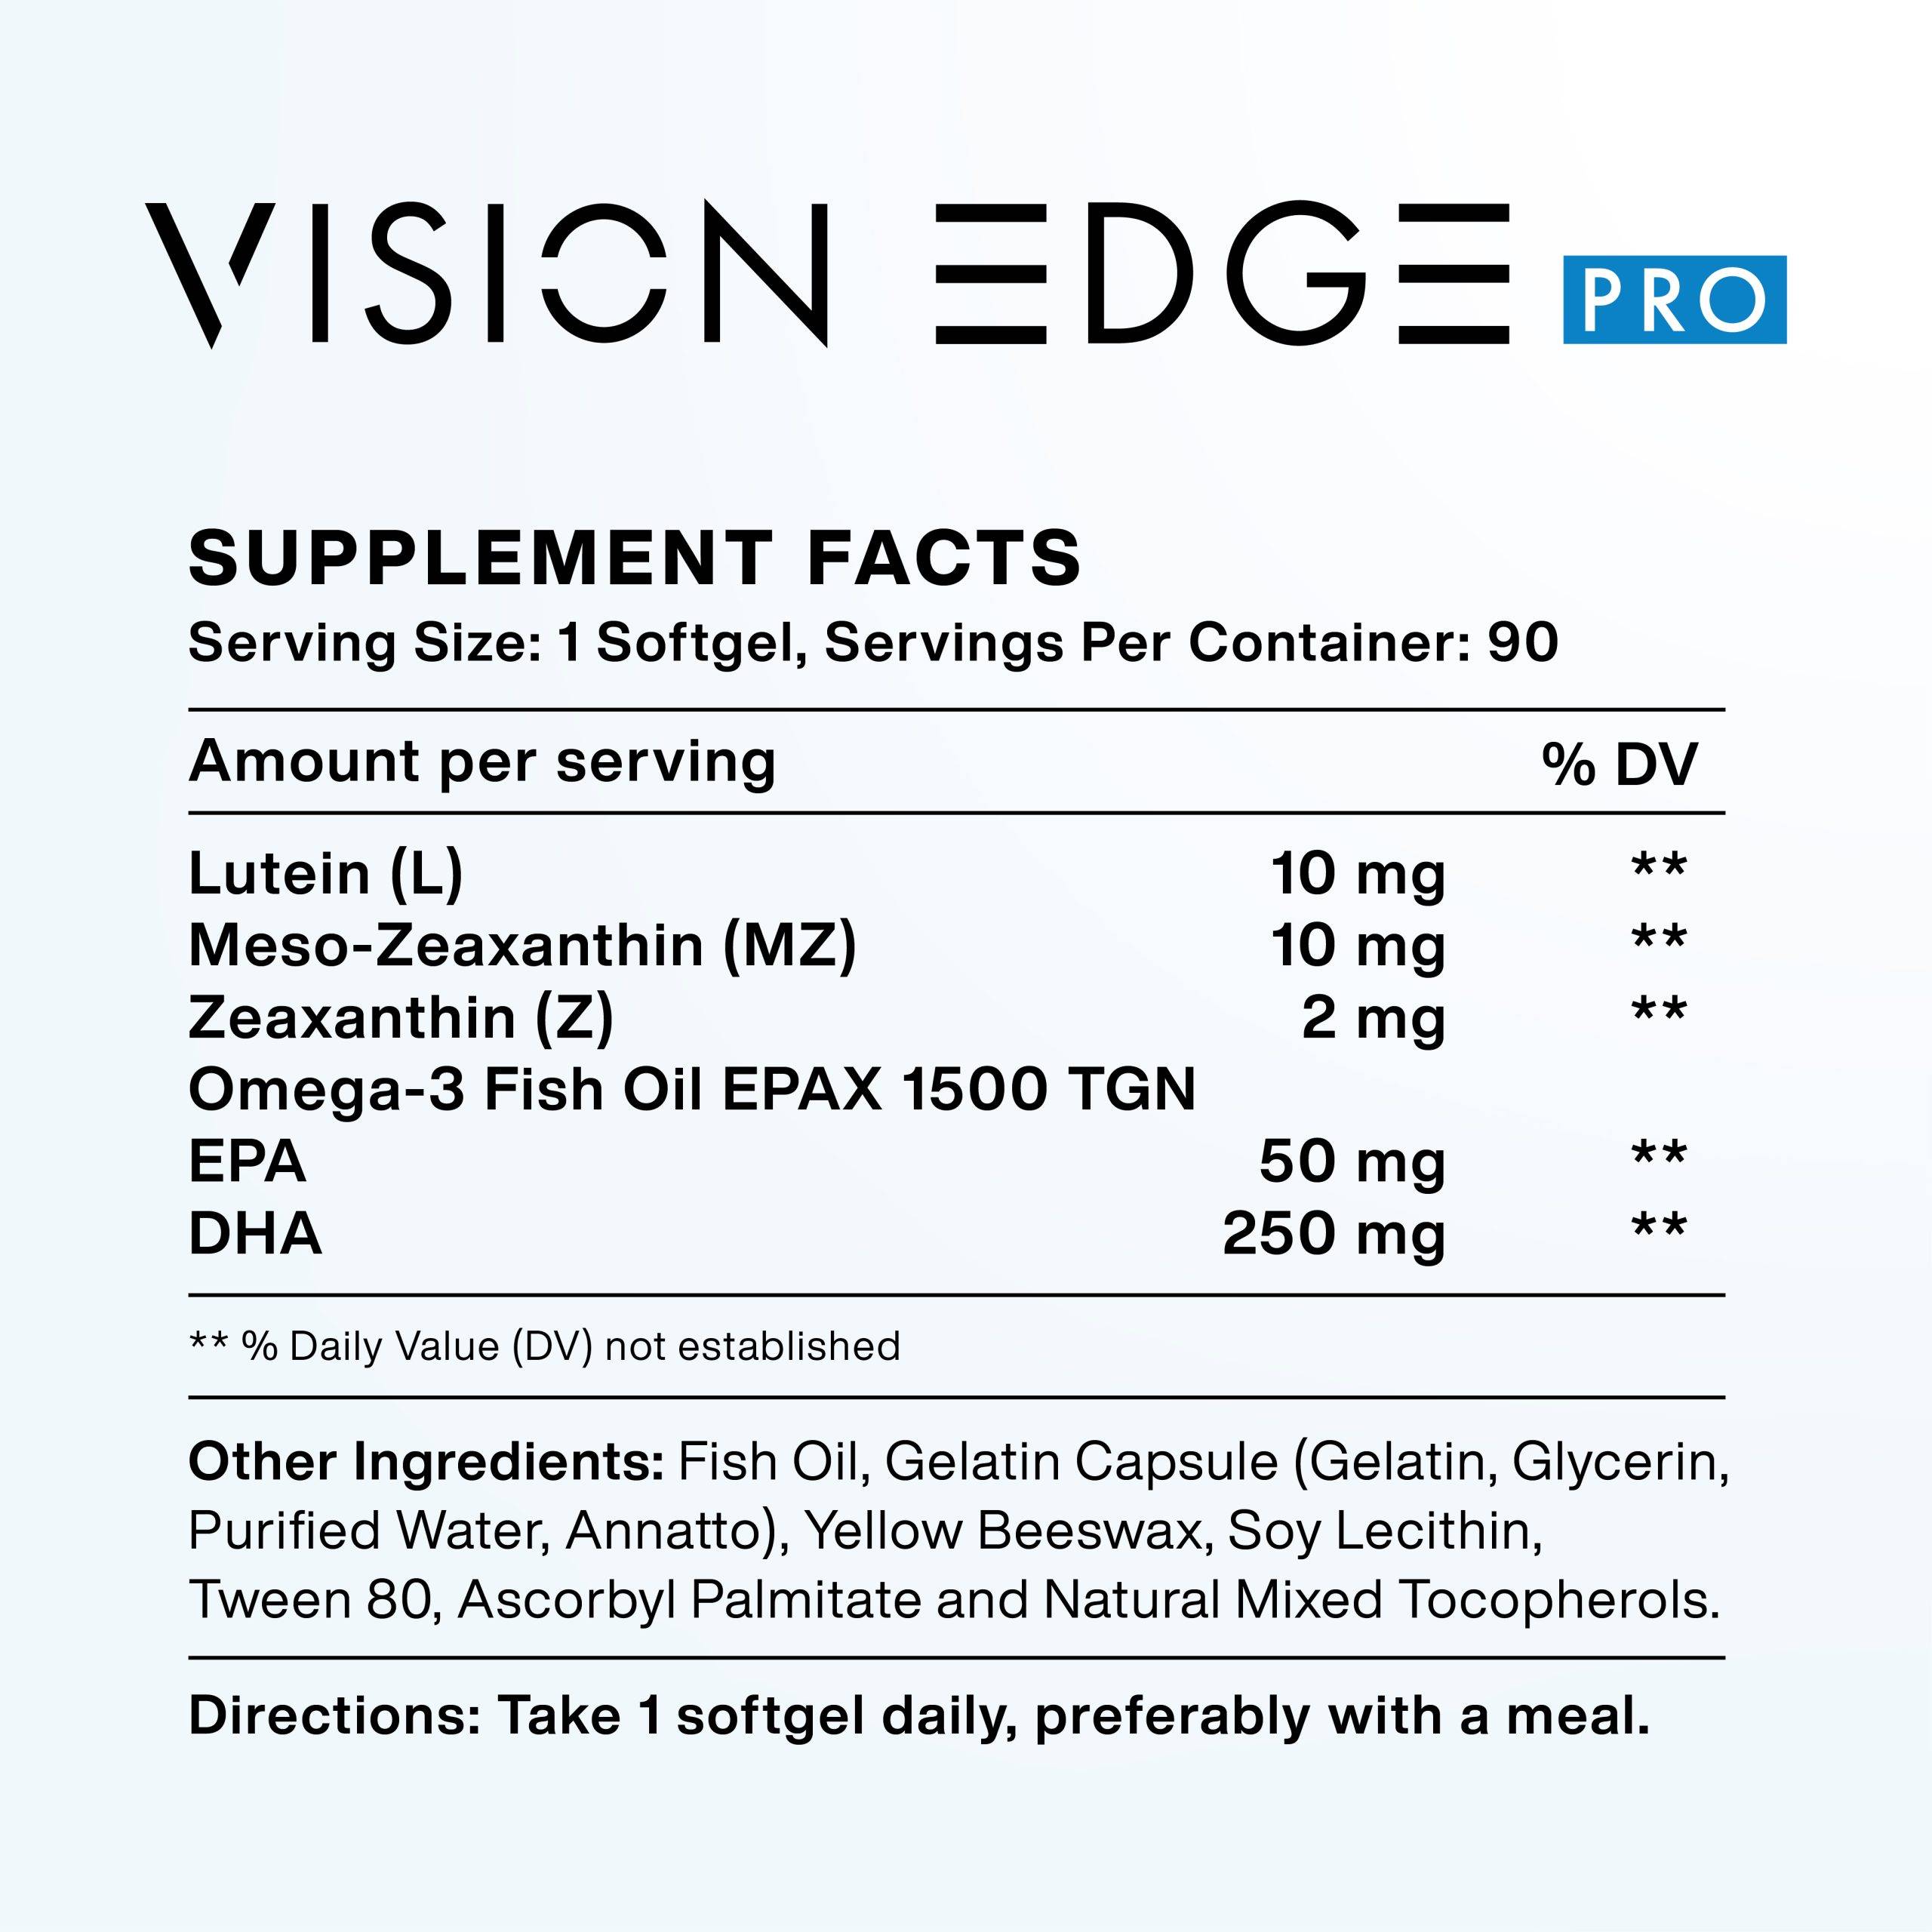 https://cdn.macuhealth.com/wp-content/uploads/2023/02/VisionEdgePRO_SupplementFacts_1000x1000-scaled.jpg